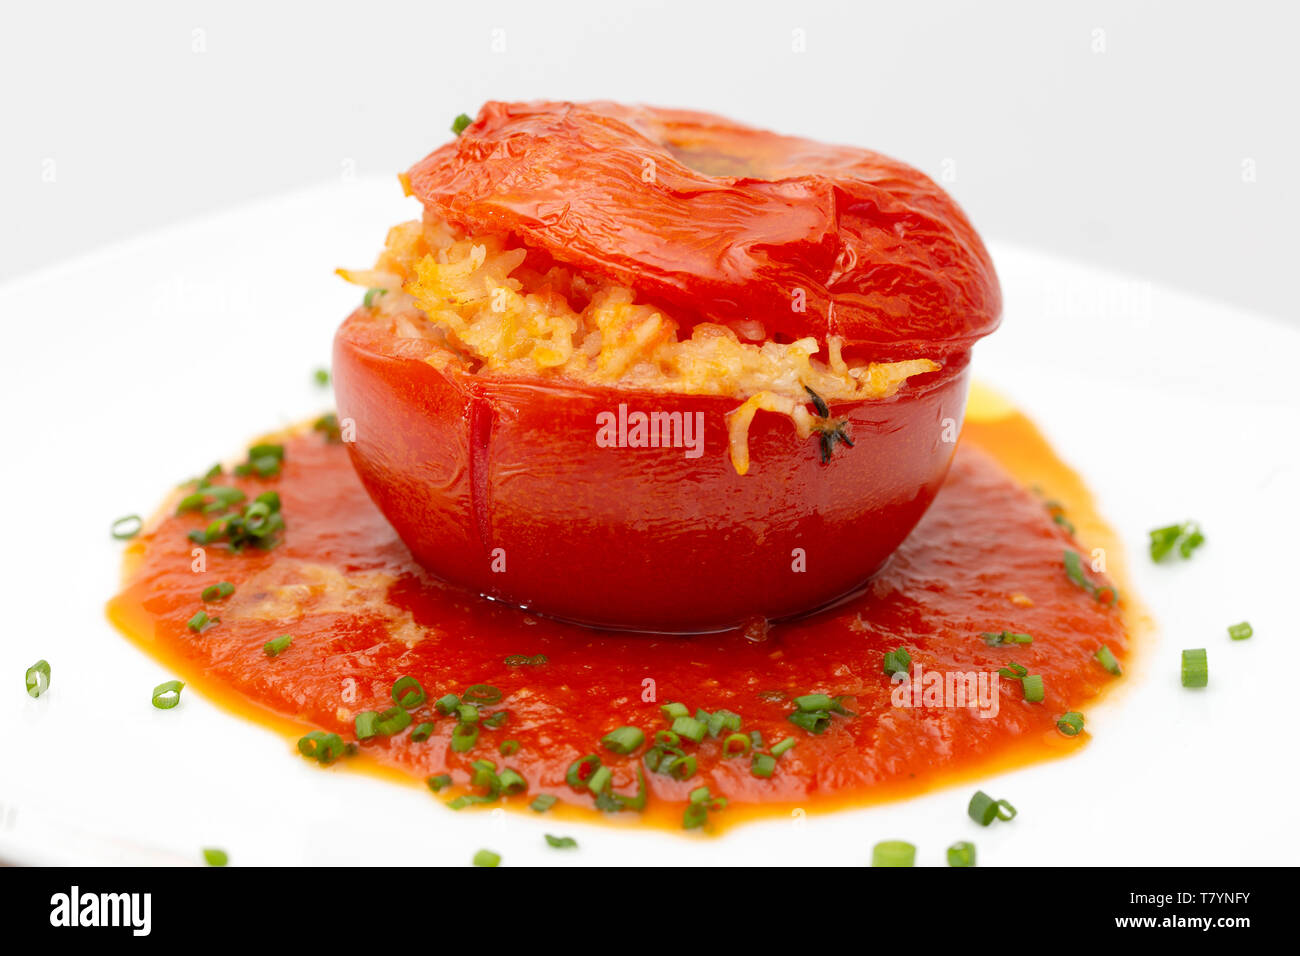 Side view of a tomato stuffed with rice and veg, served on a bed of sauce with a garnish of chopped chives. Stock Photo